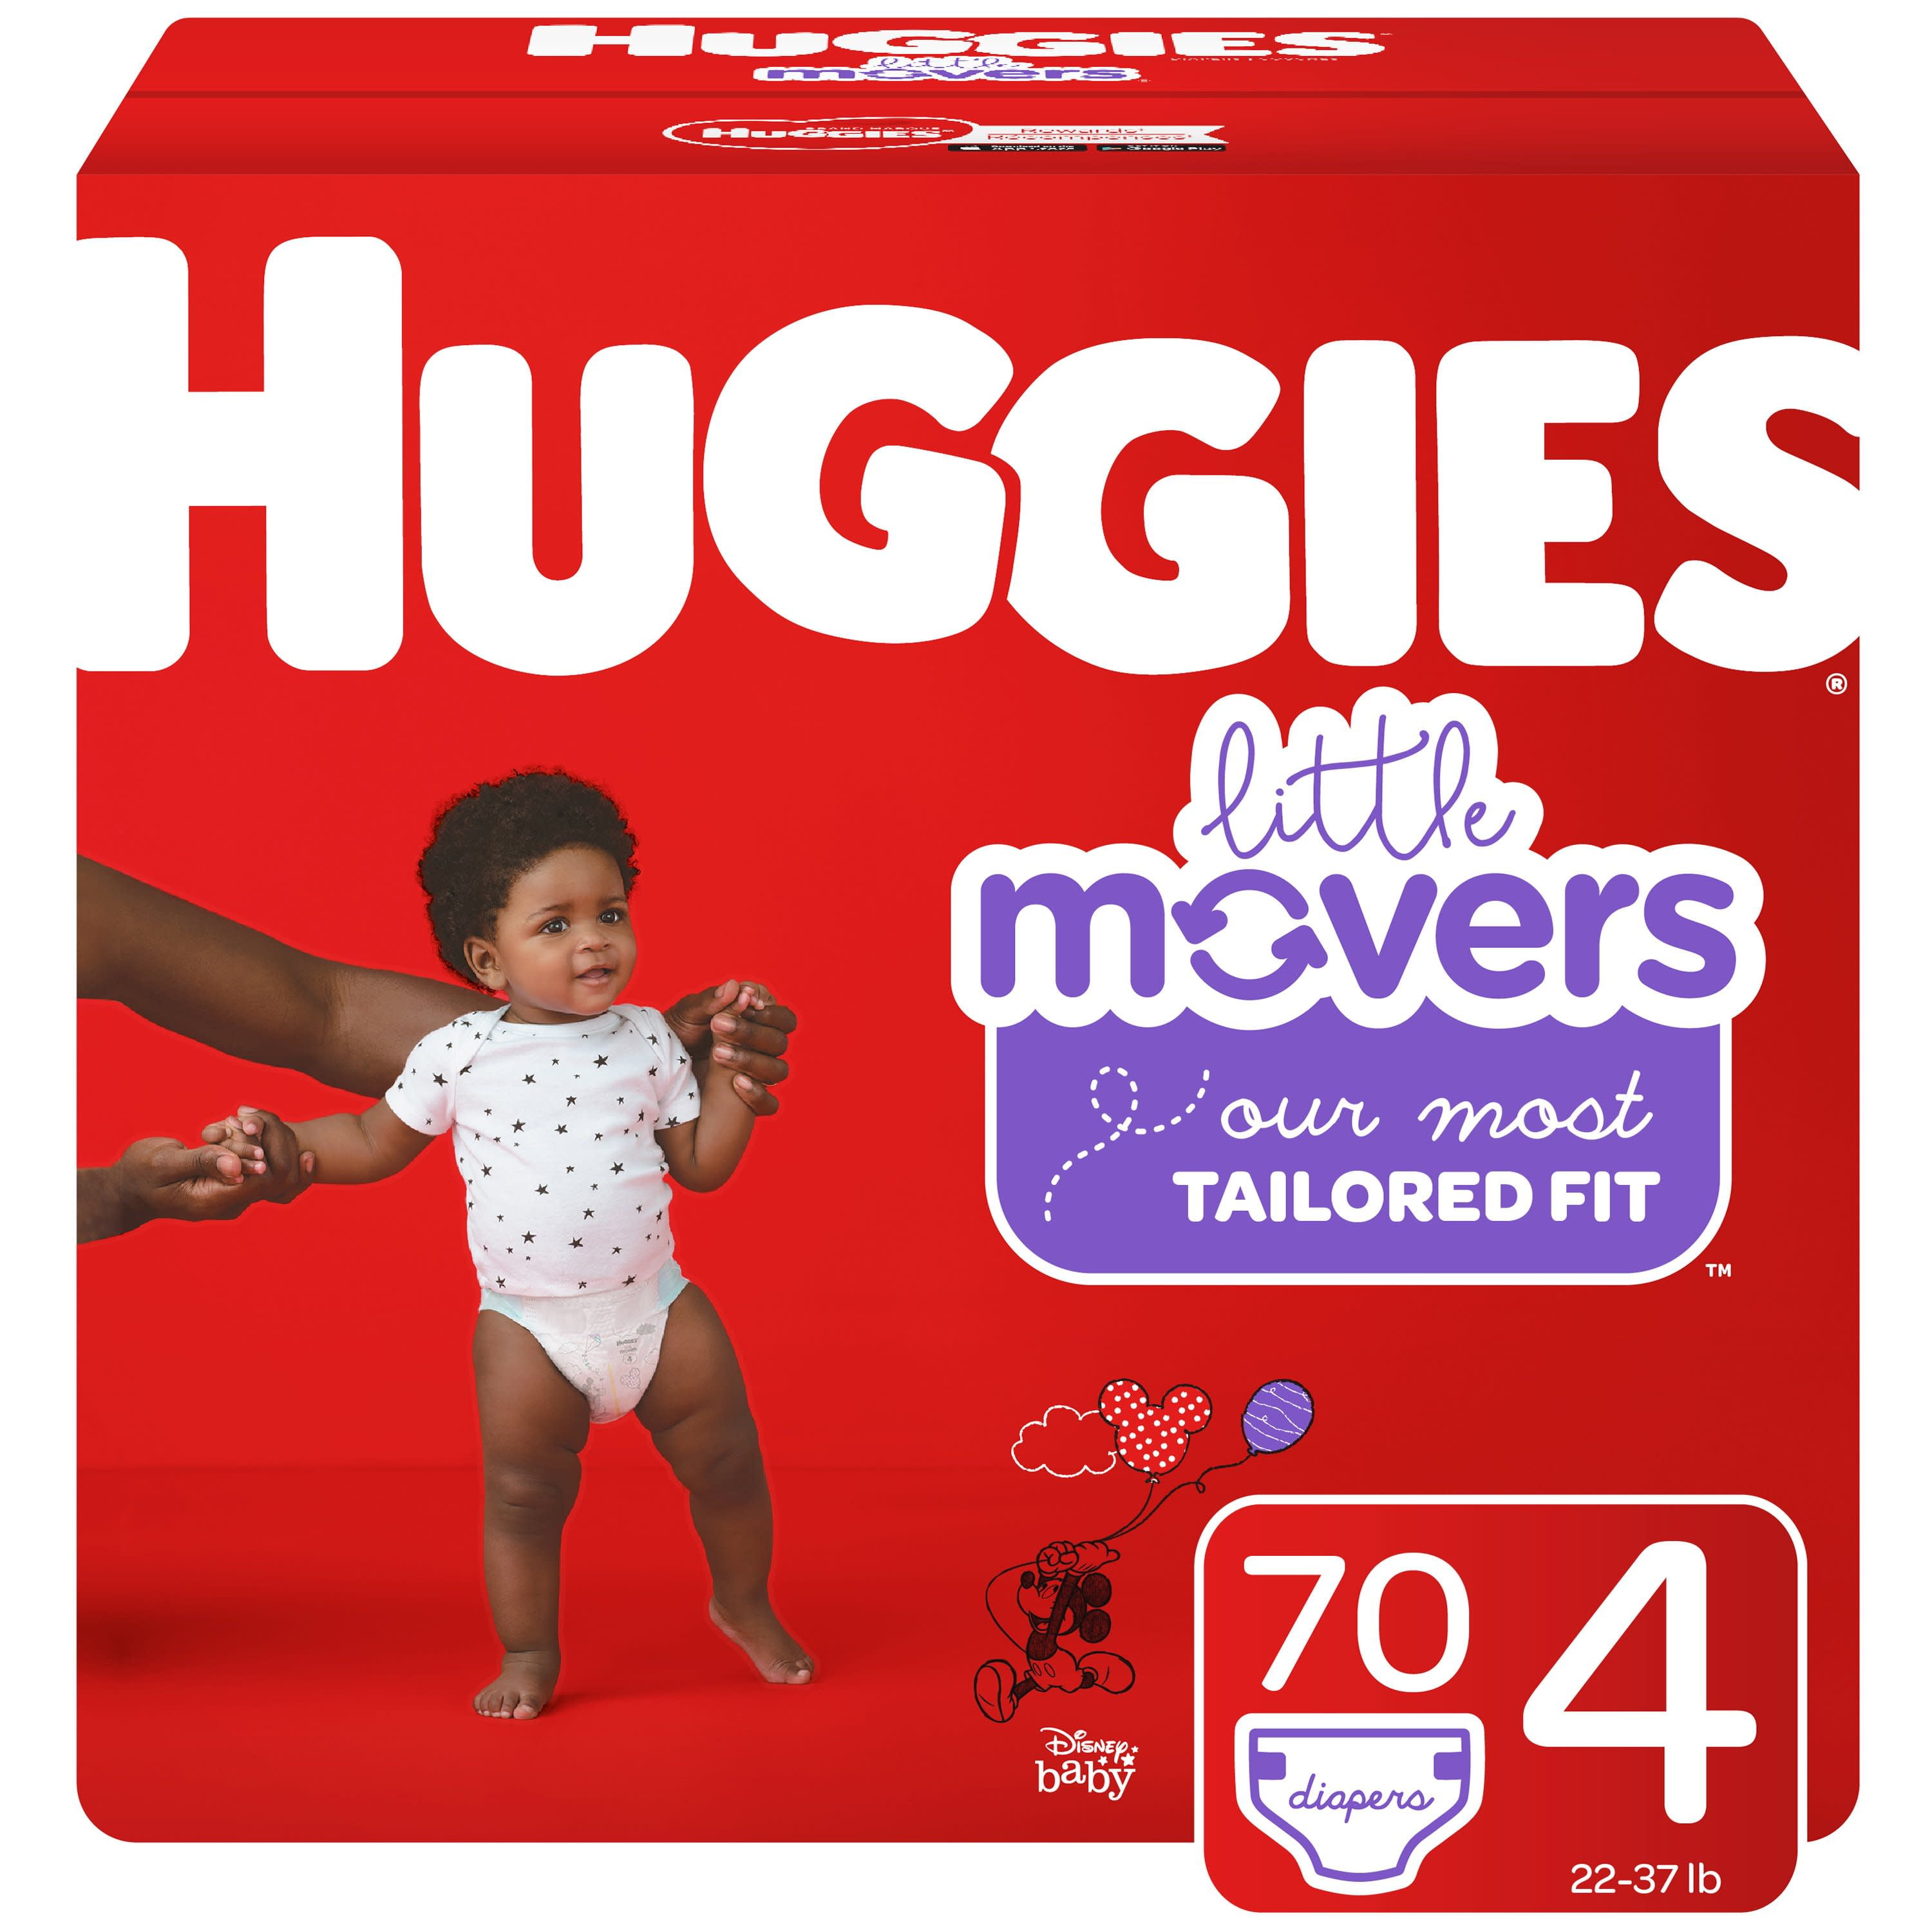 Huggies+34870+Little+Movers+Diapers%2C+Size+7+-+52+Count for sale online